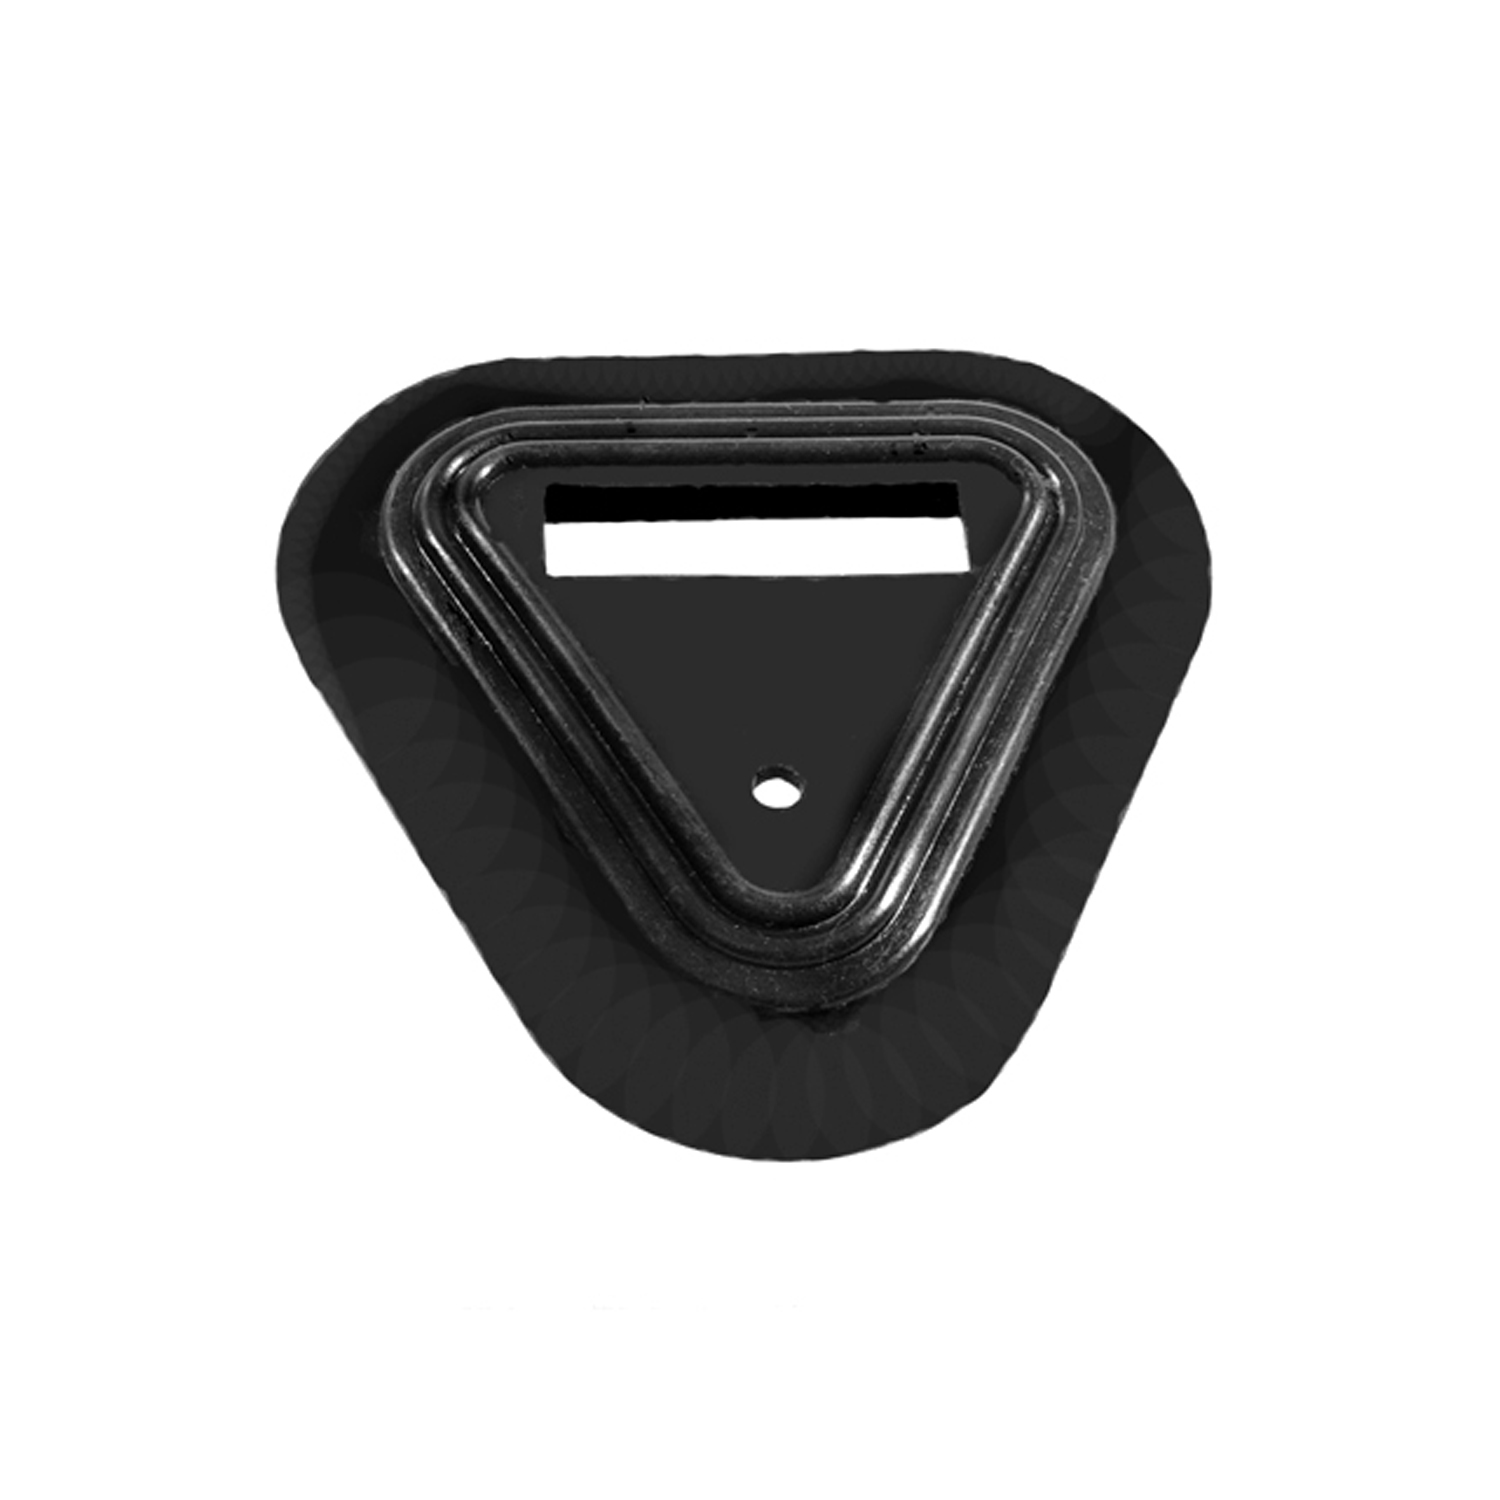 1957 Chevrolet One-Fifty Series Accelerator Pedal Pad Trim Grommet.  Black, Rubber-SM 79-A